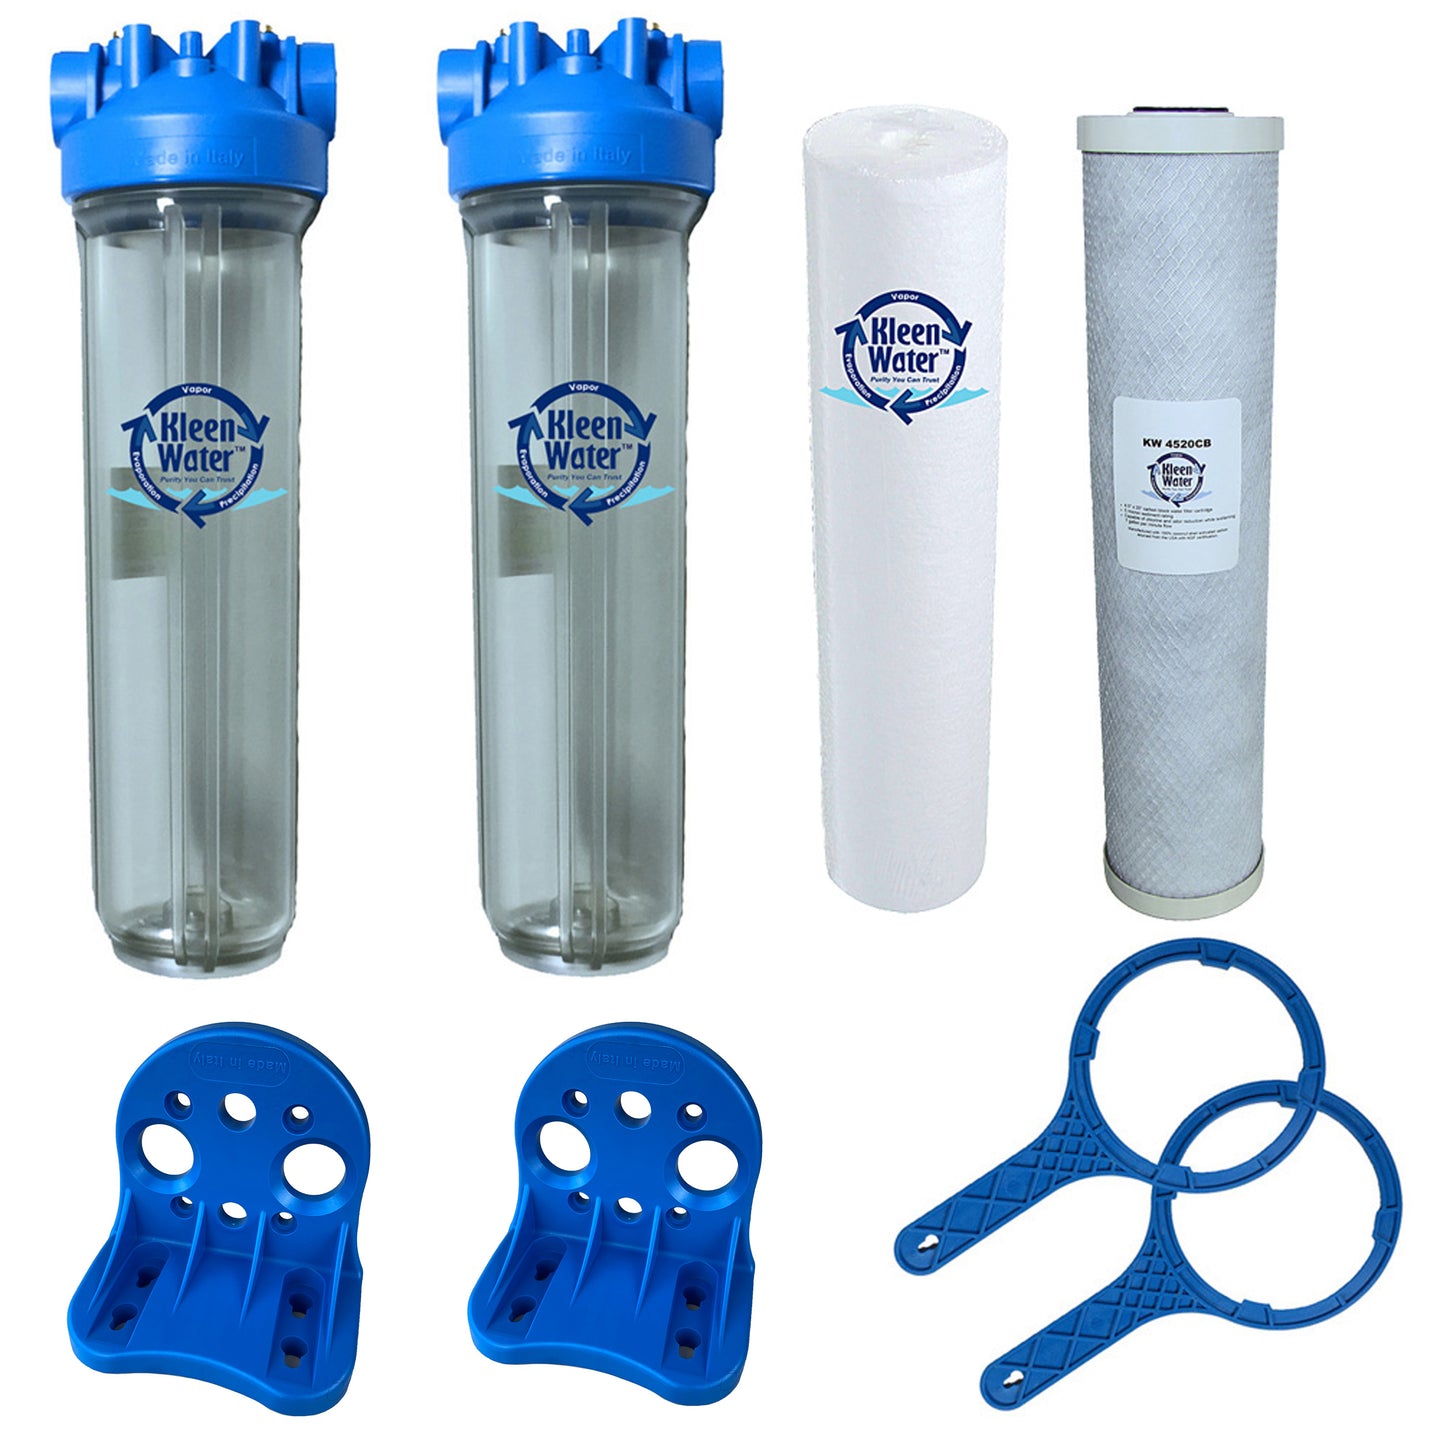 Corrosion Control Water Filter for Plumbing, Tanks and Pipes